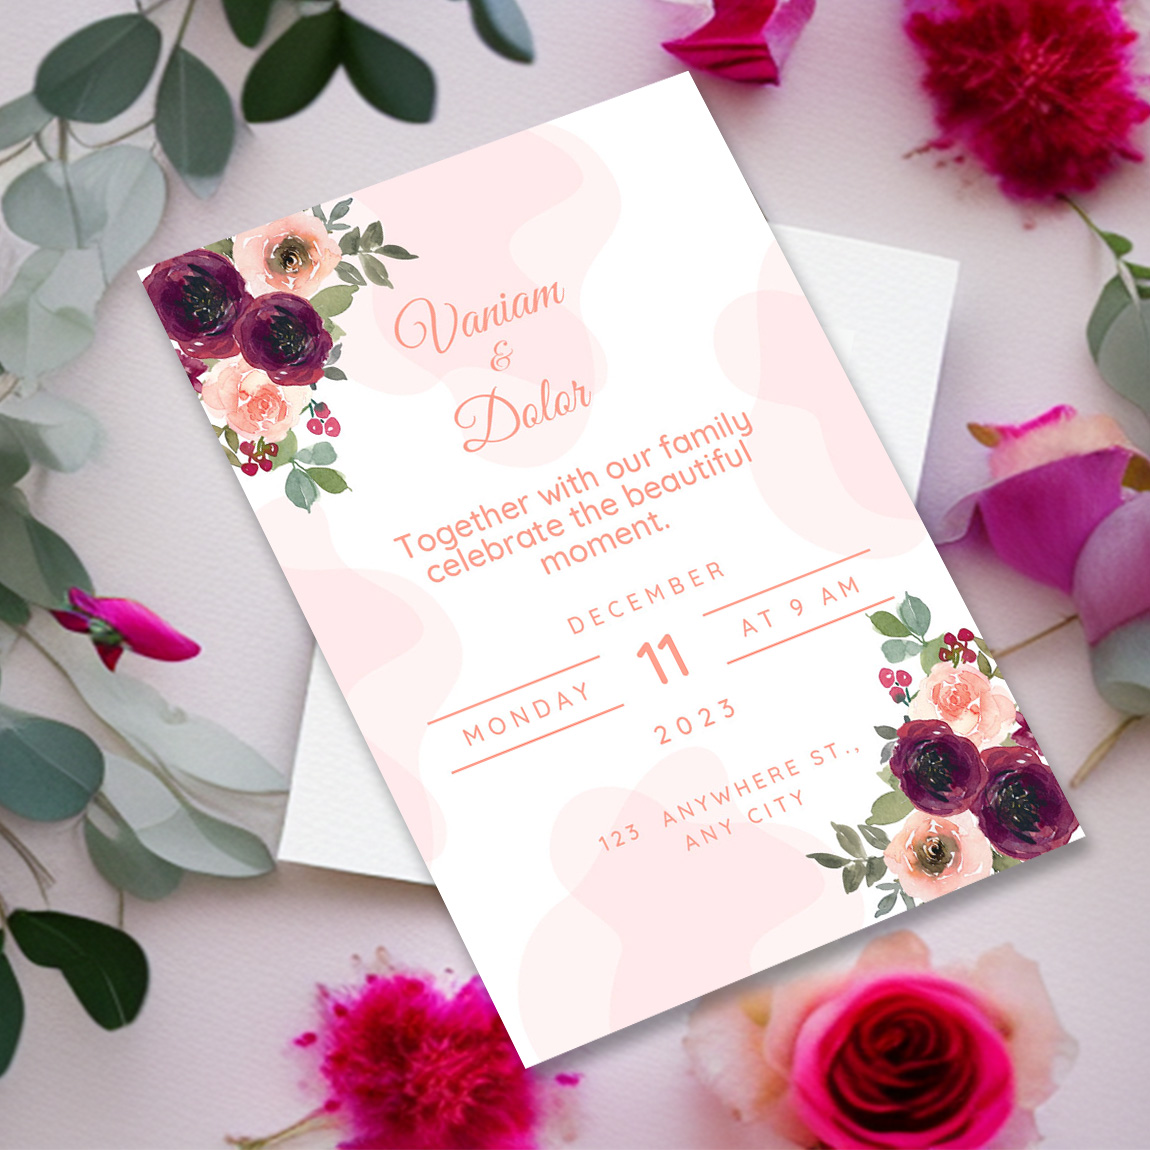 Image of enchanting wedding invitation with floral design.